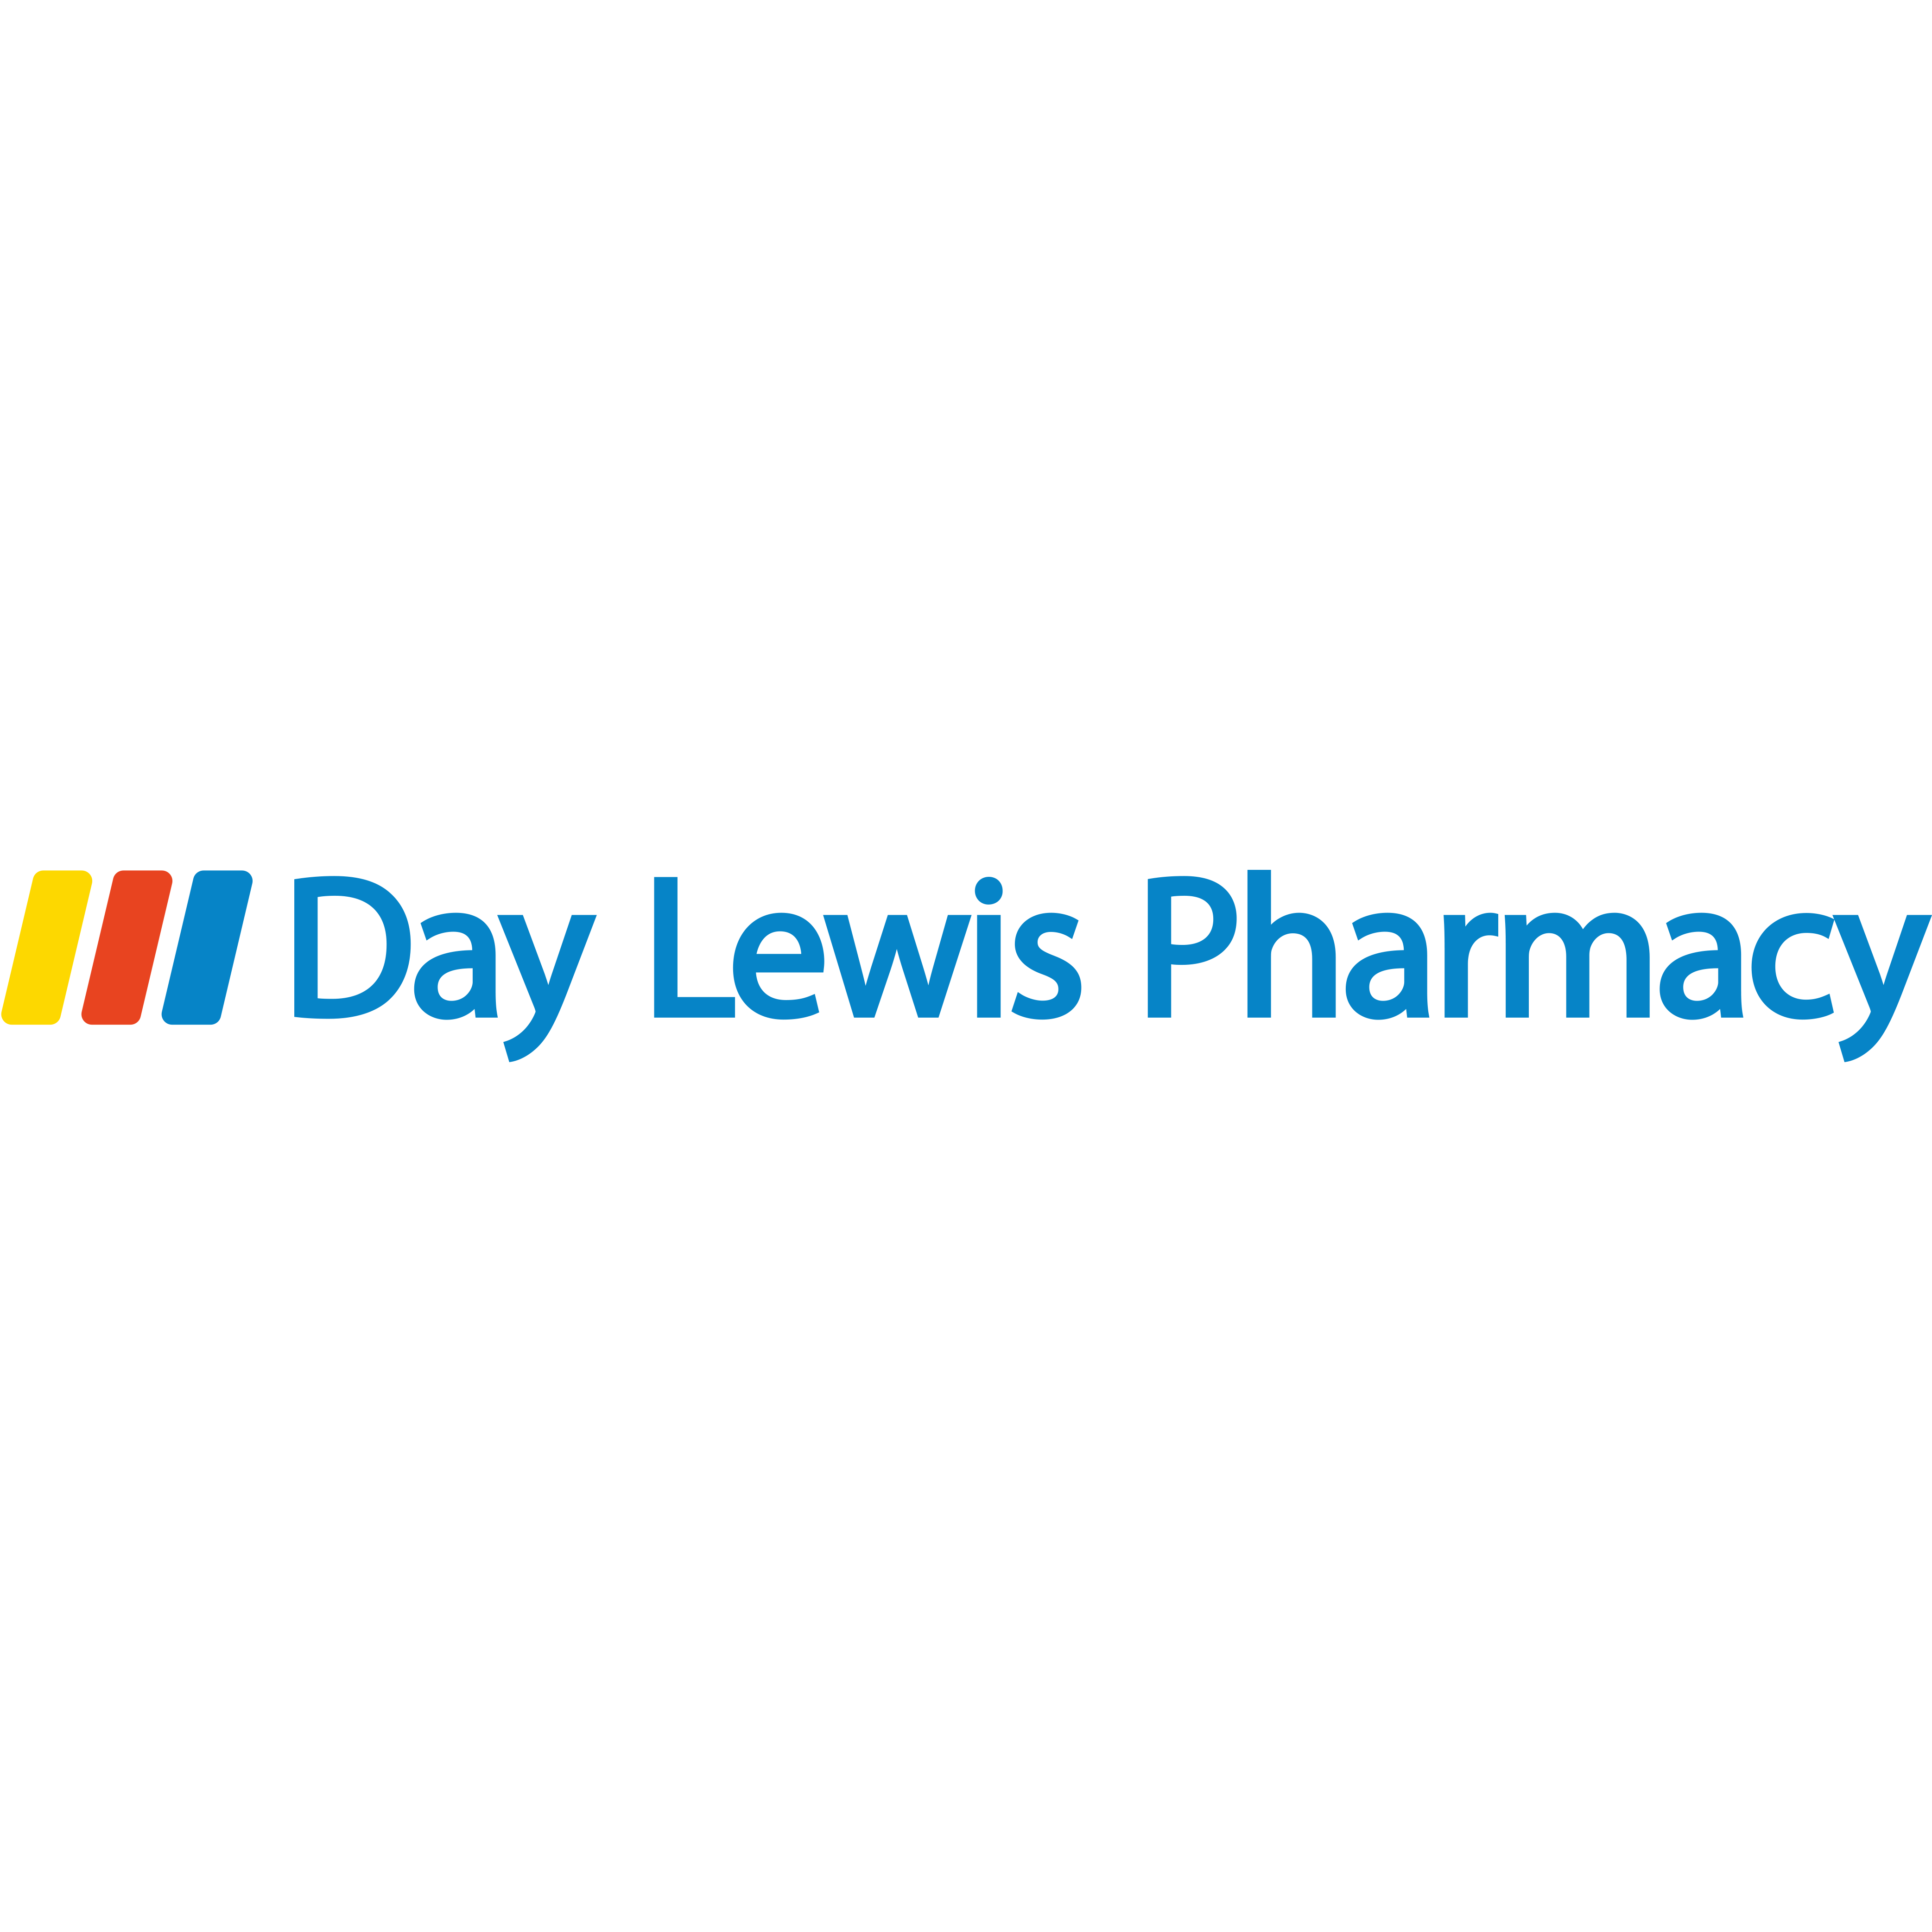 Day Lewis Pharmacy Grimsby Grimsby 01472 879181